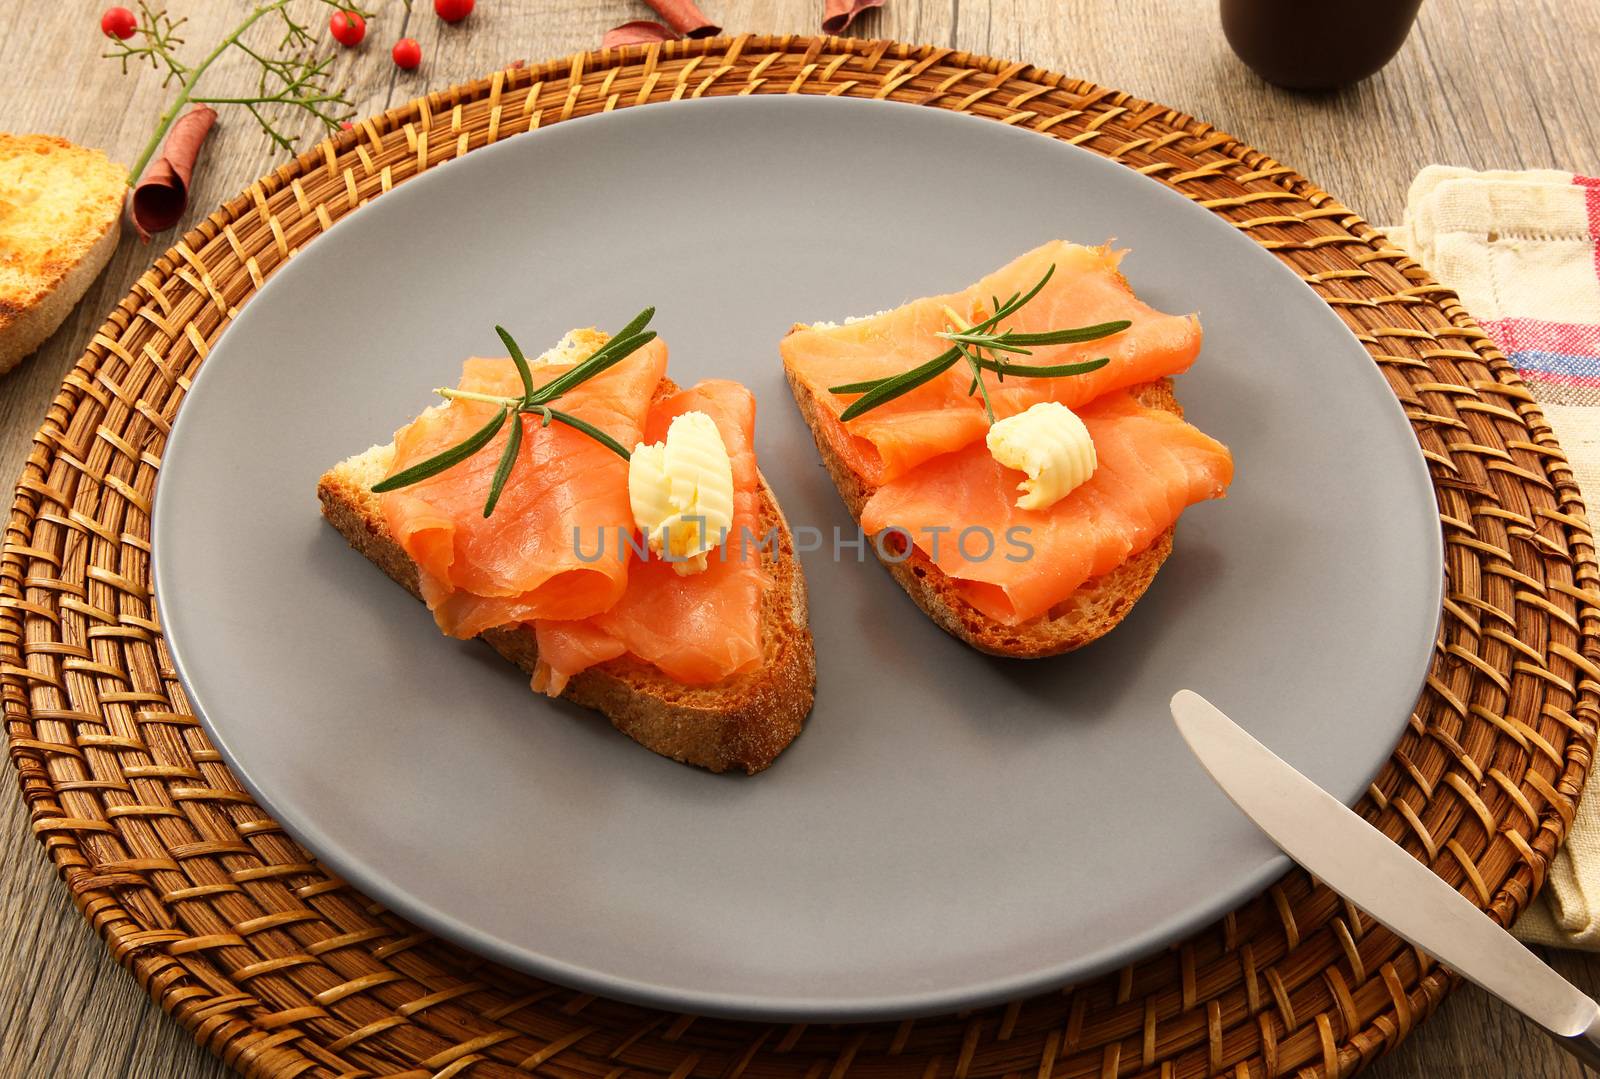 Exquisite bread croutons with smoked salmon